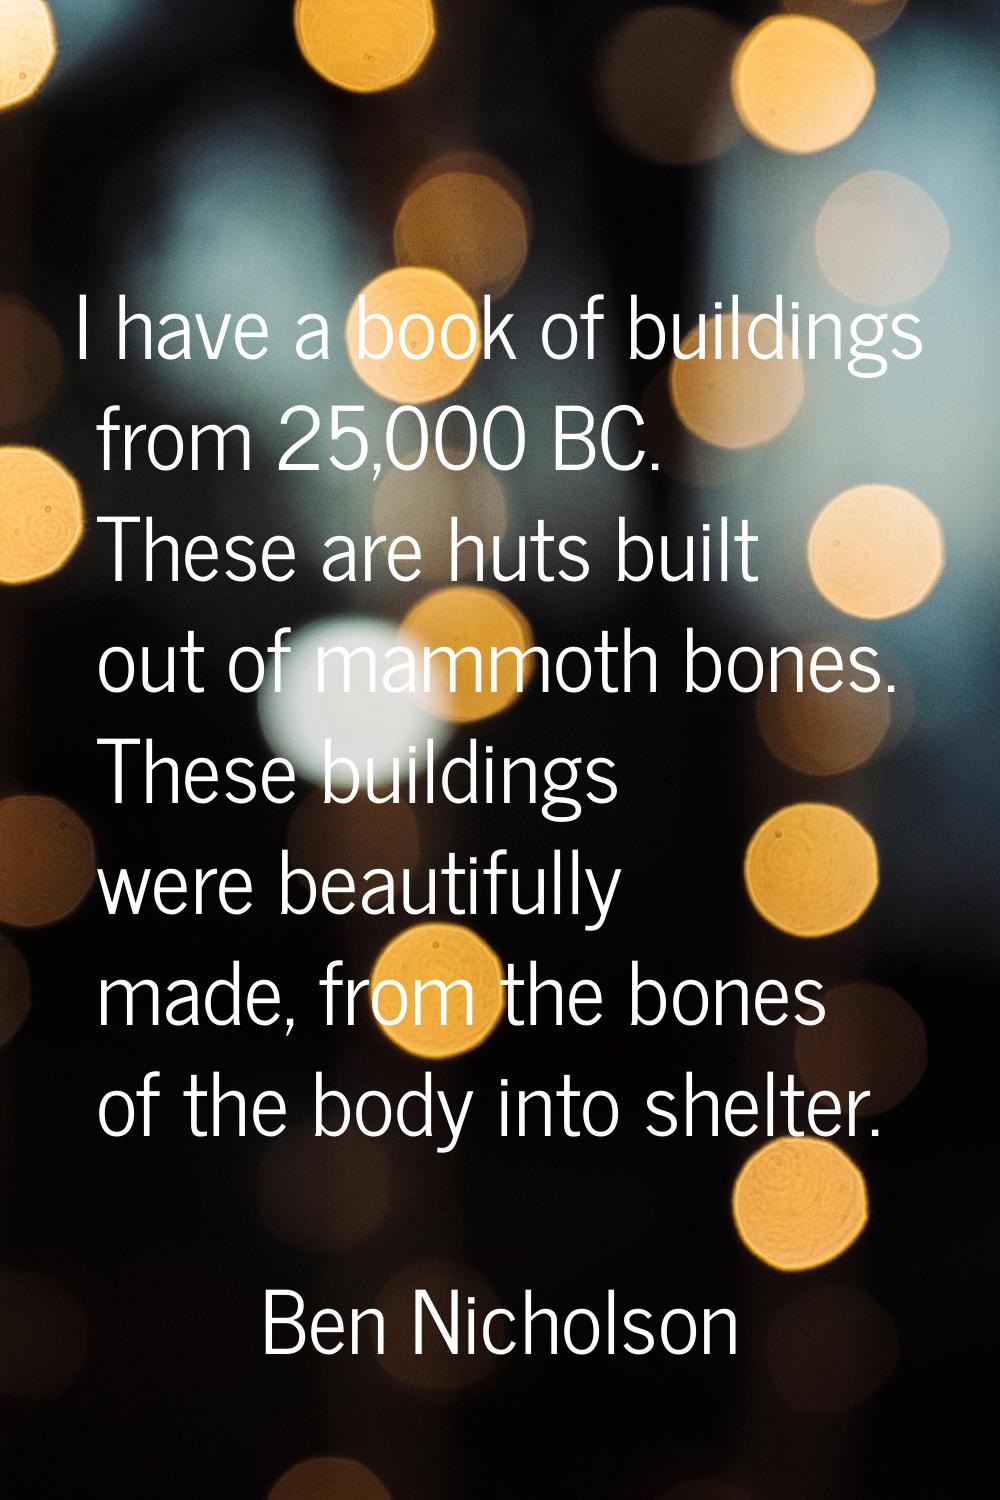 I have a book of buildings from 25,000 BC. These are huts built out of mammoth bones. These buildin